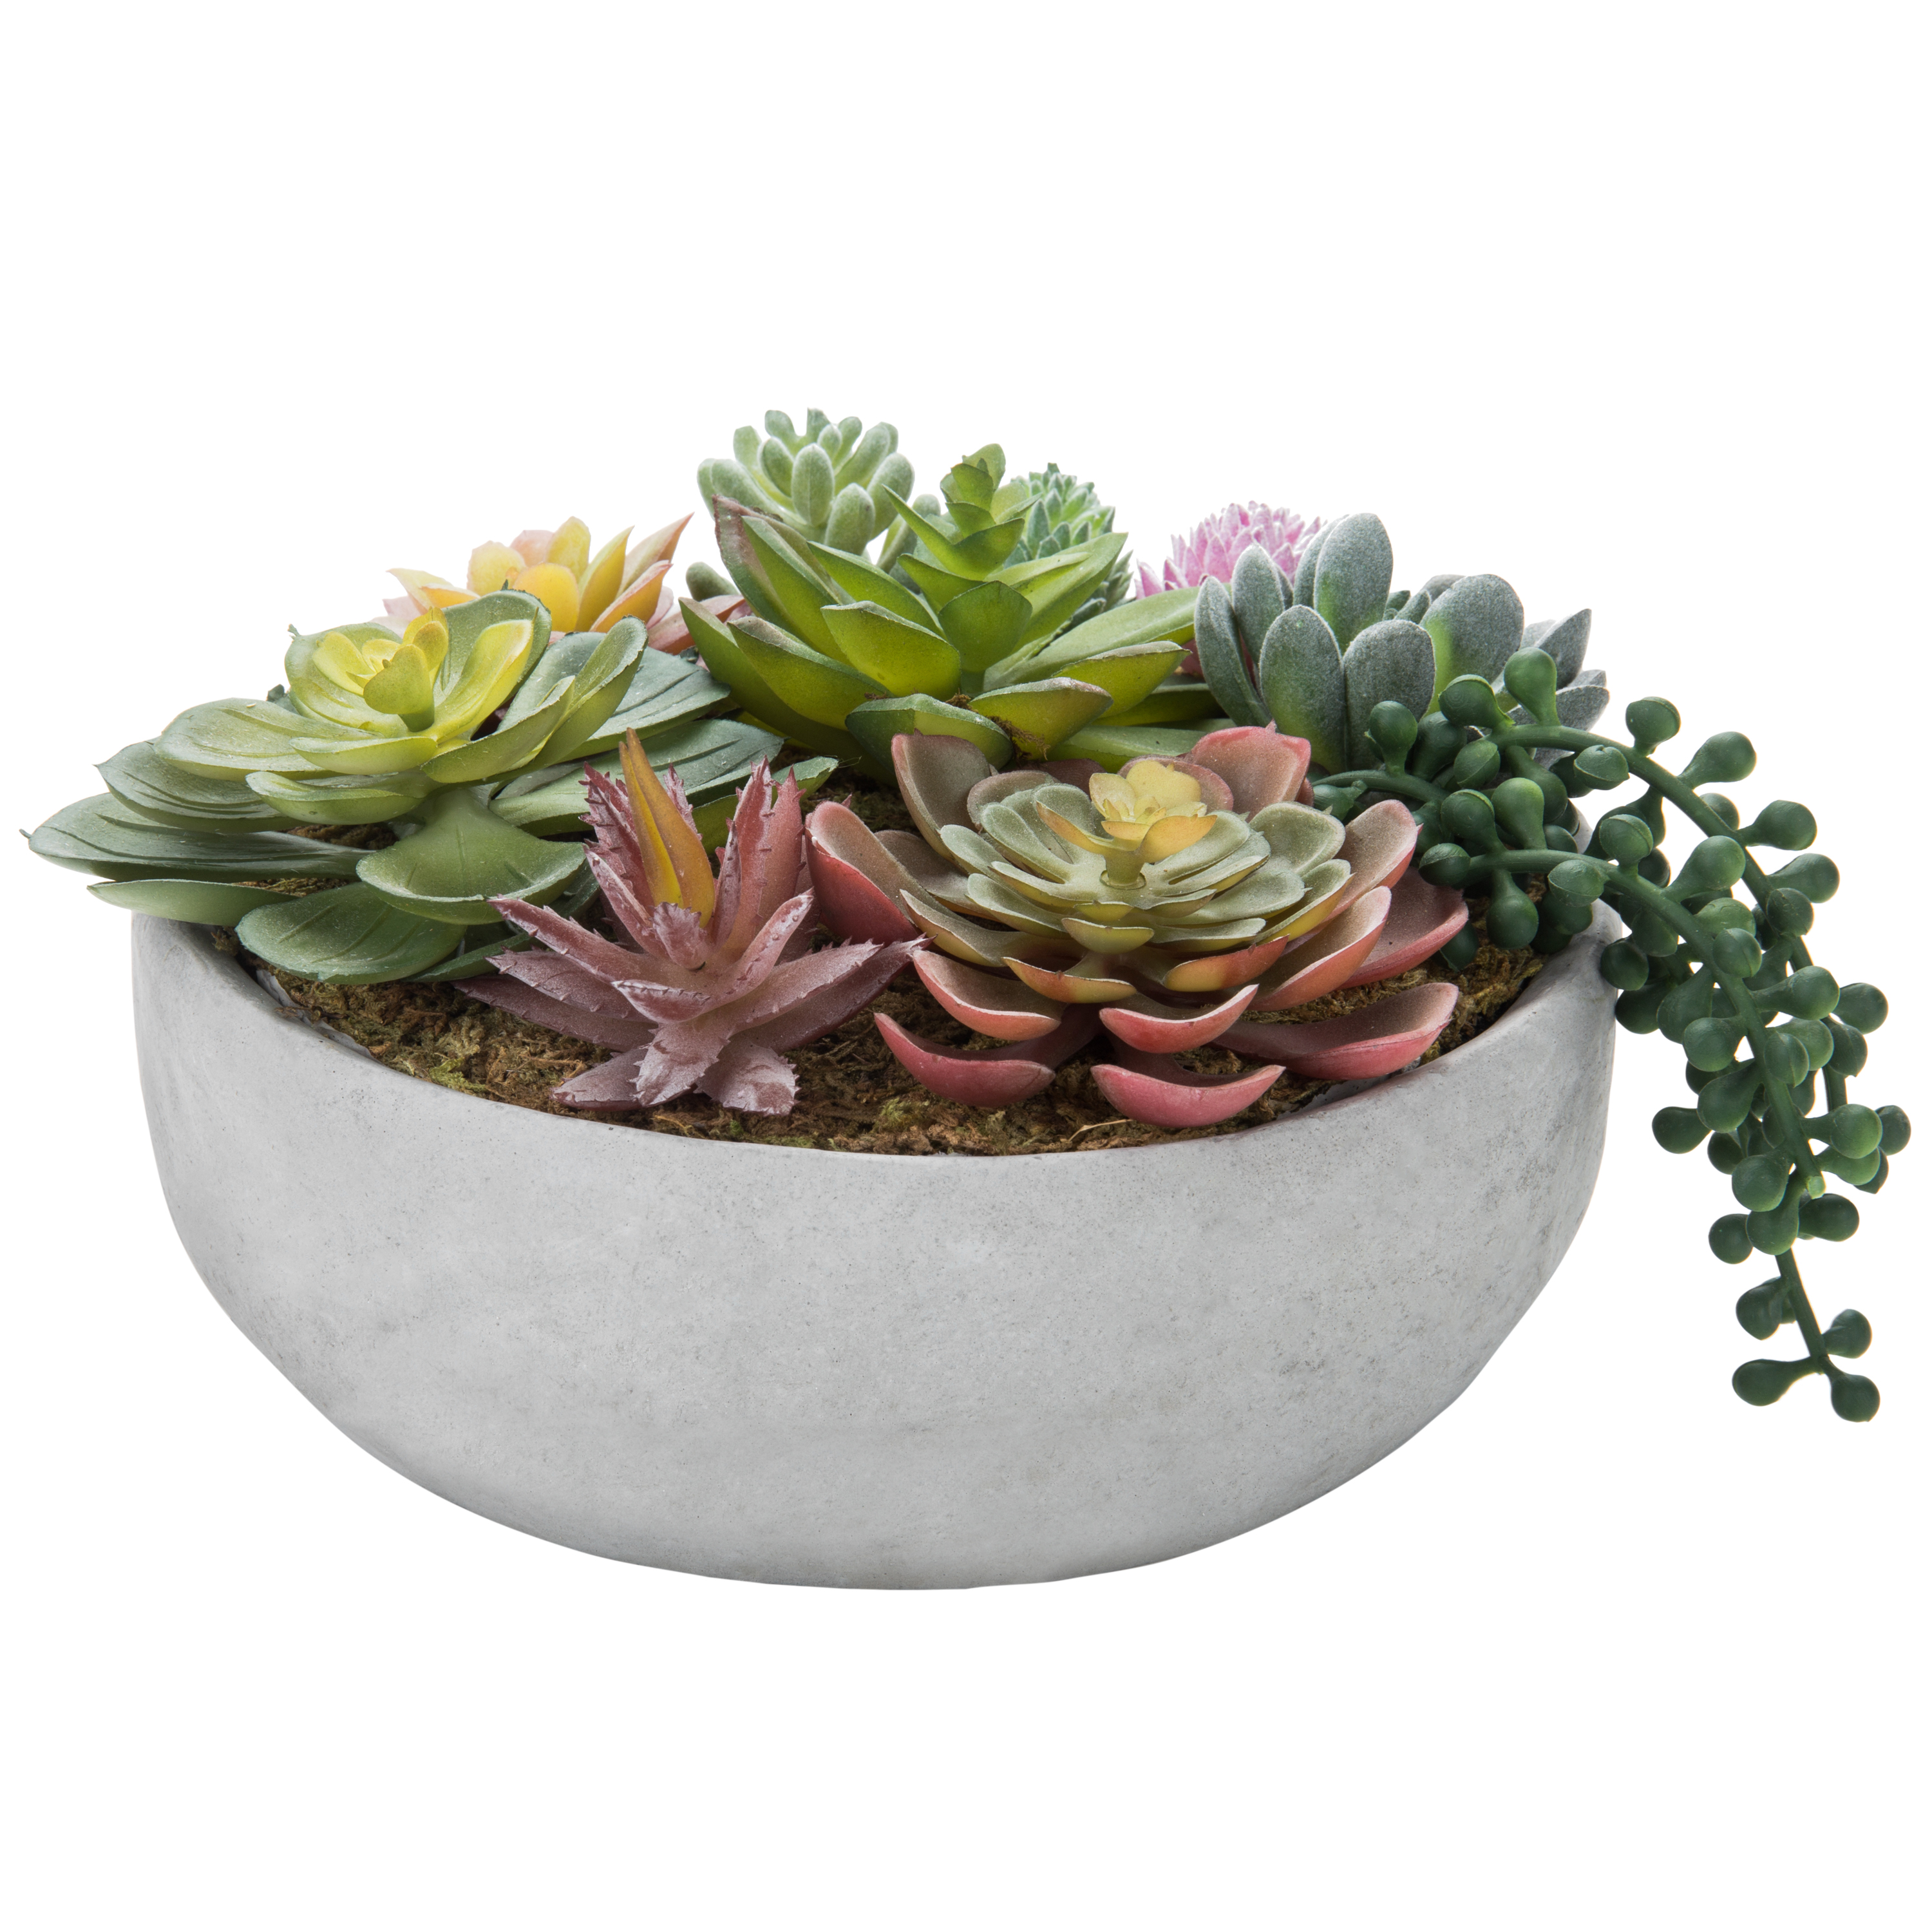 MyGift 8 inch Artificial Succulent Arrangement in Round Modern Concrete Pot, Gray - image 1 of 5